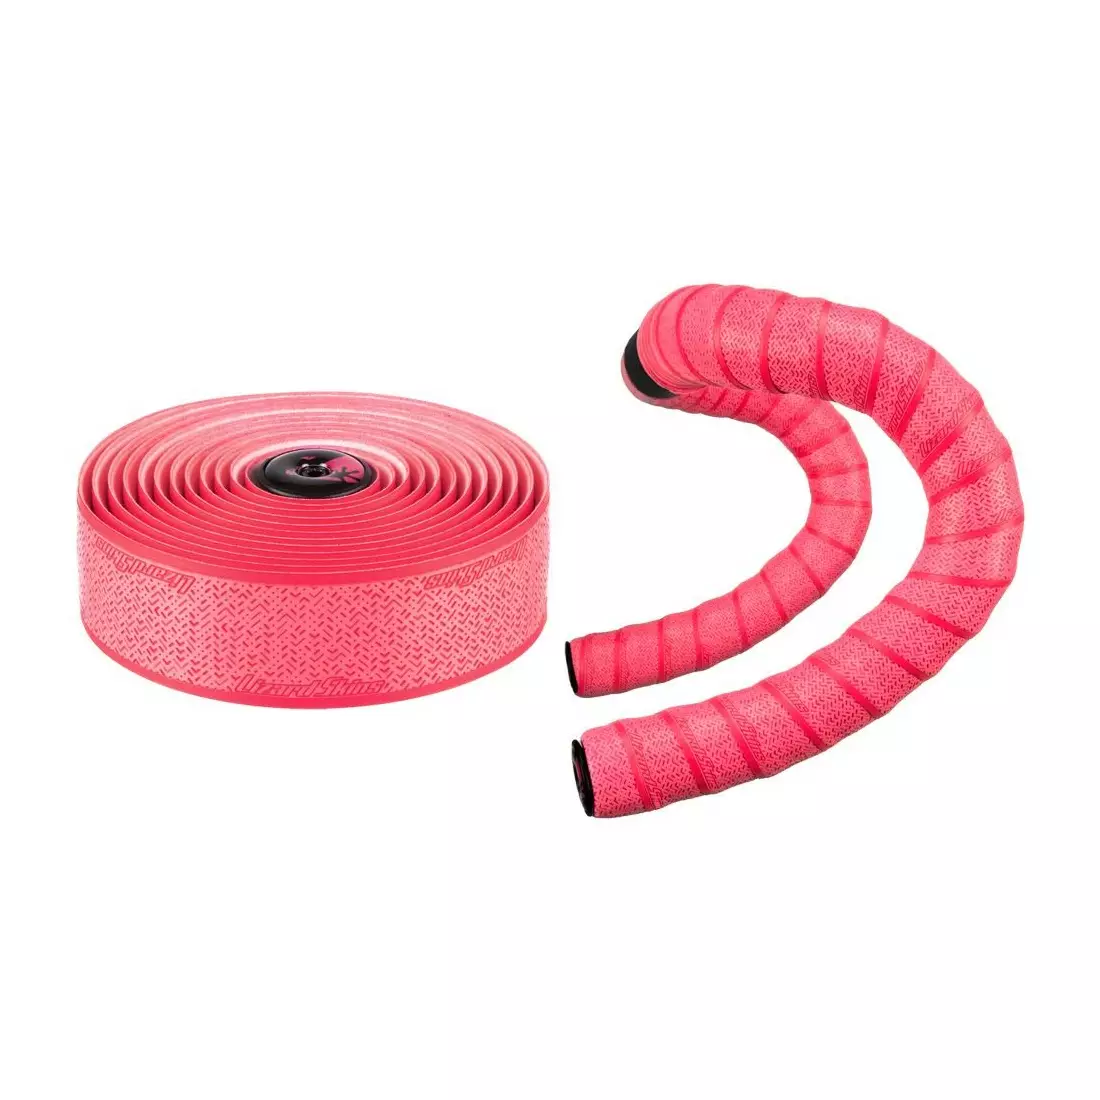 LIZARDSKINS bicycle handlebar wrap dsp 3.2 bar tape 3,2mm neon pink LZS-DSPCY356